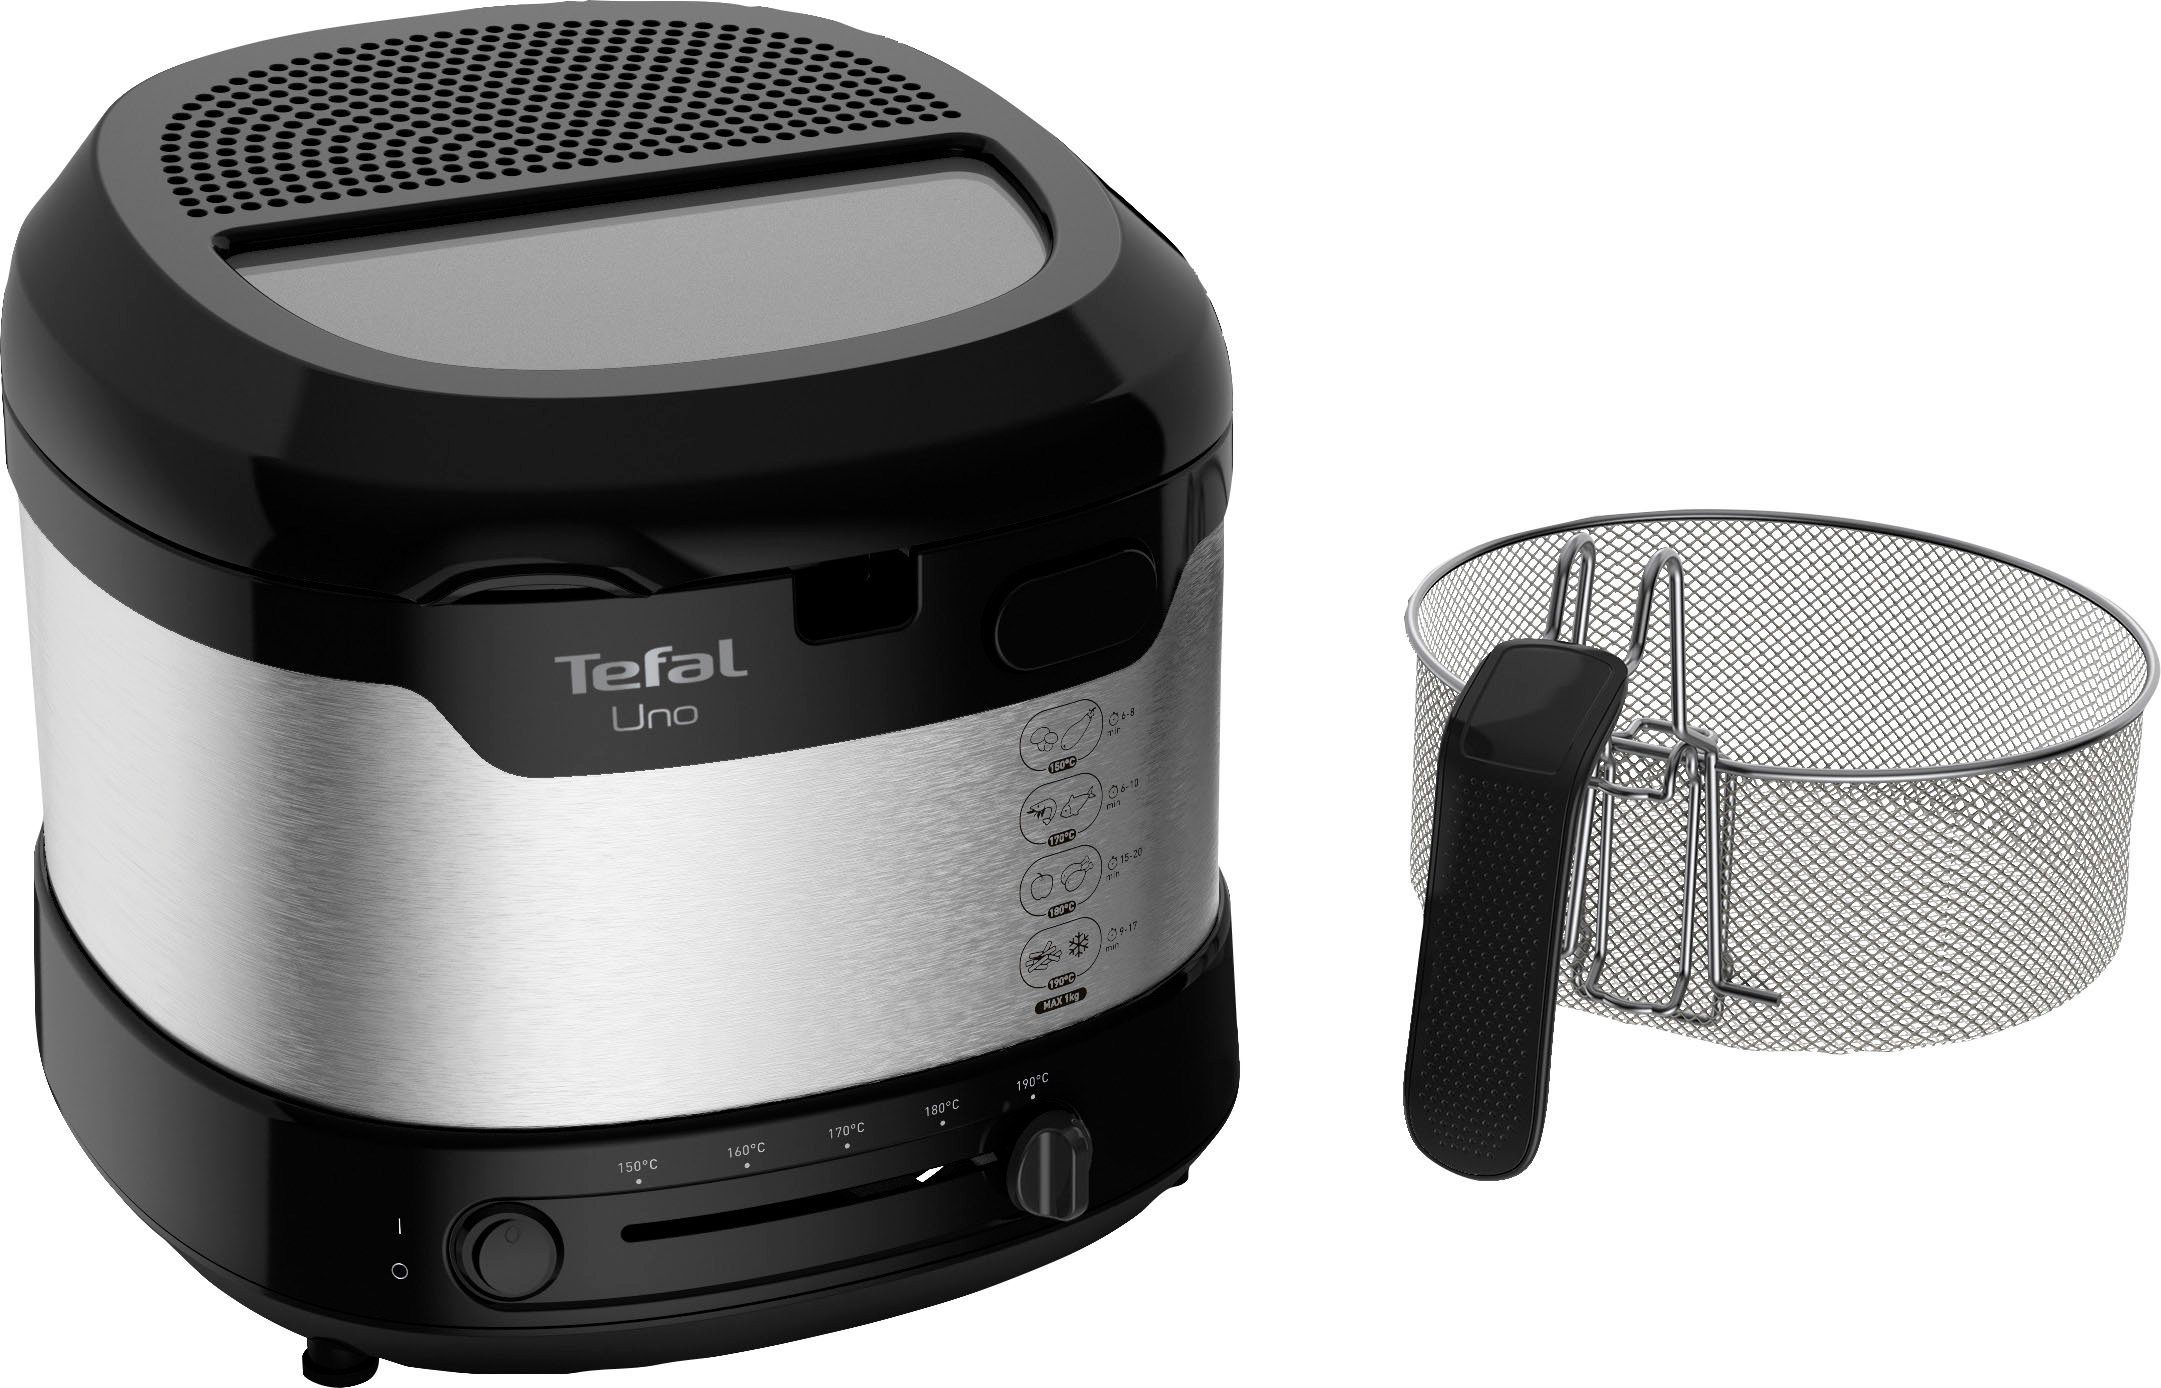 Tefal Fritteuse FF 215D Uno Fritteuse Edelstahl, 1600 W